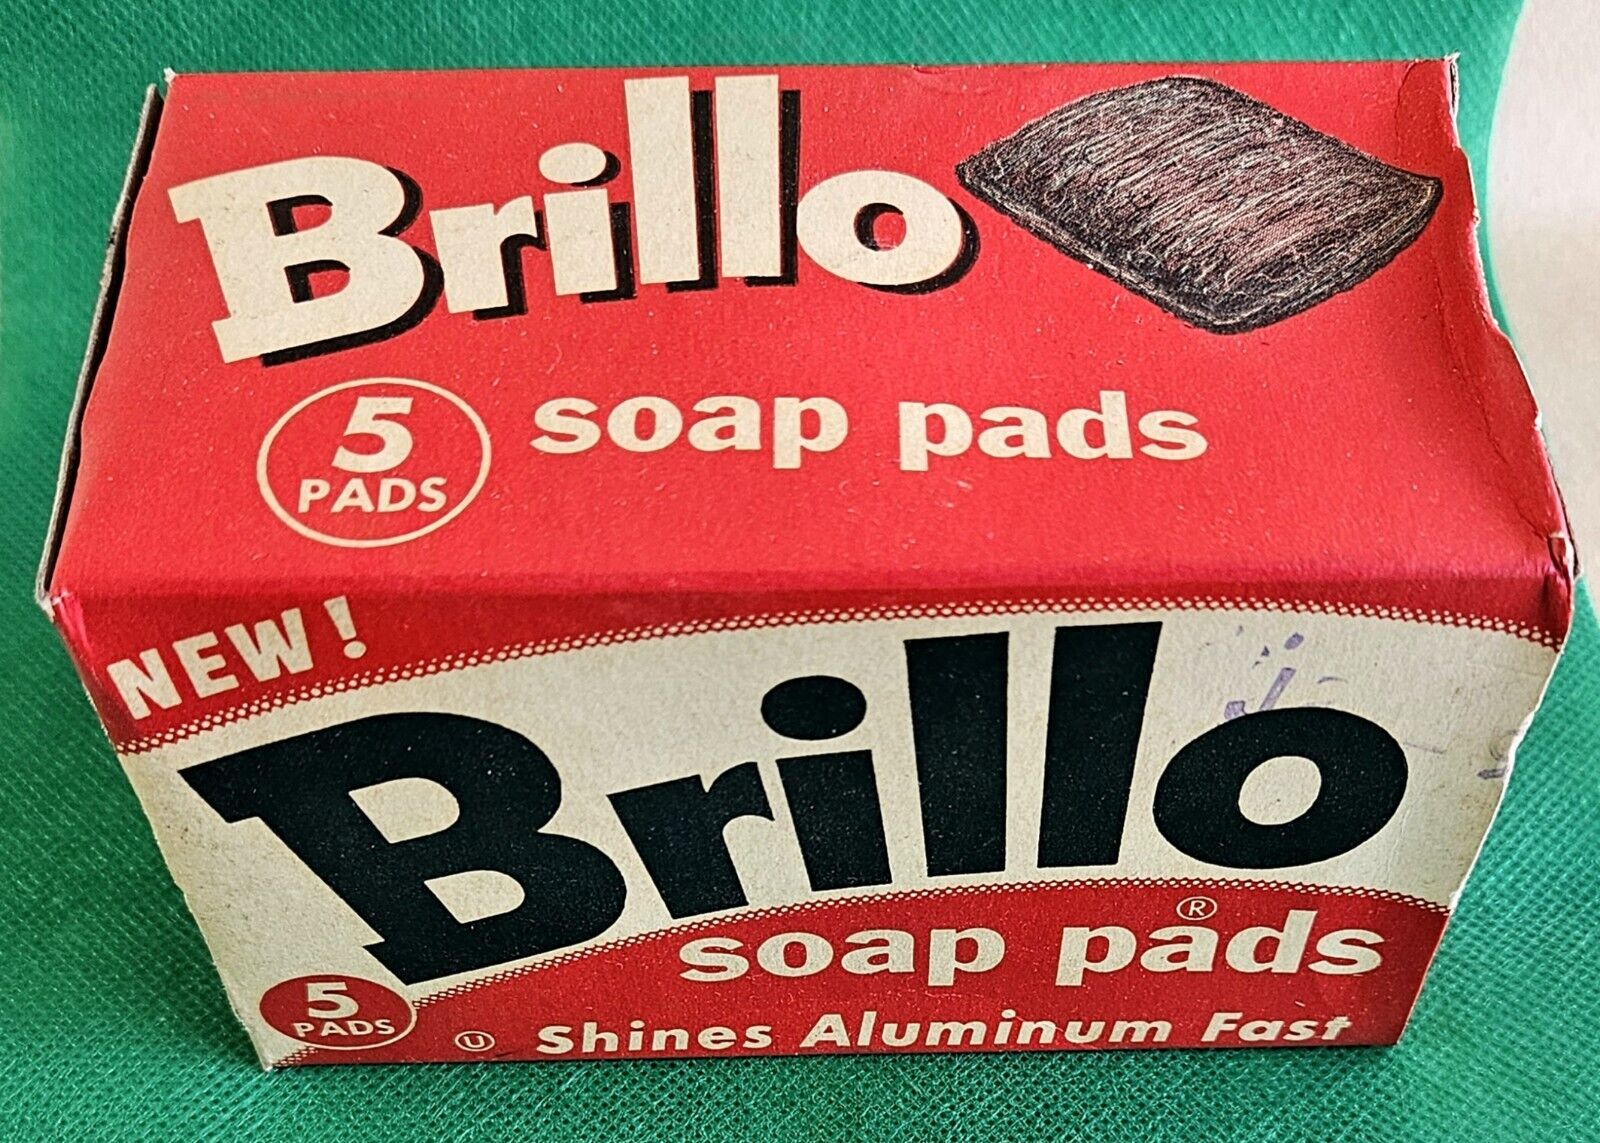 1950's Vintage Brillo Soap Pads Unopened Box of 5 Soap Pads